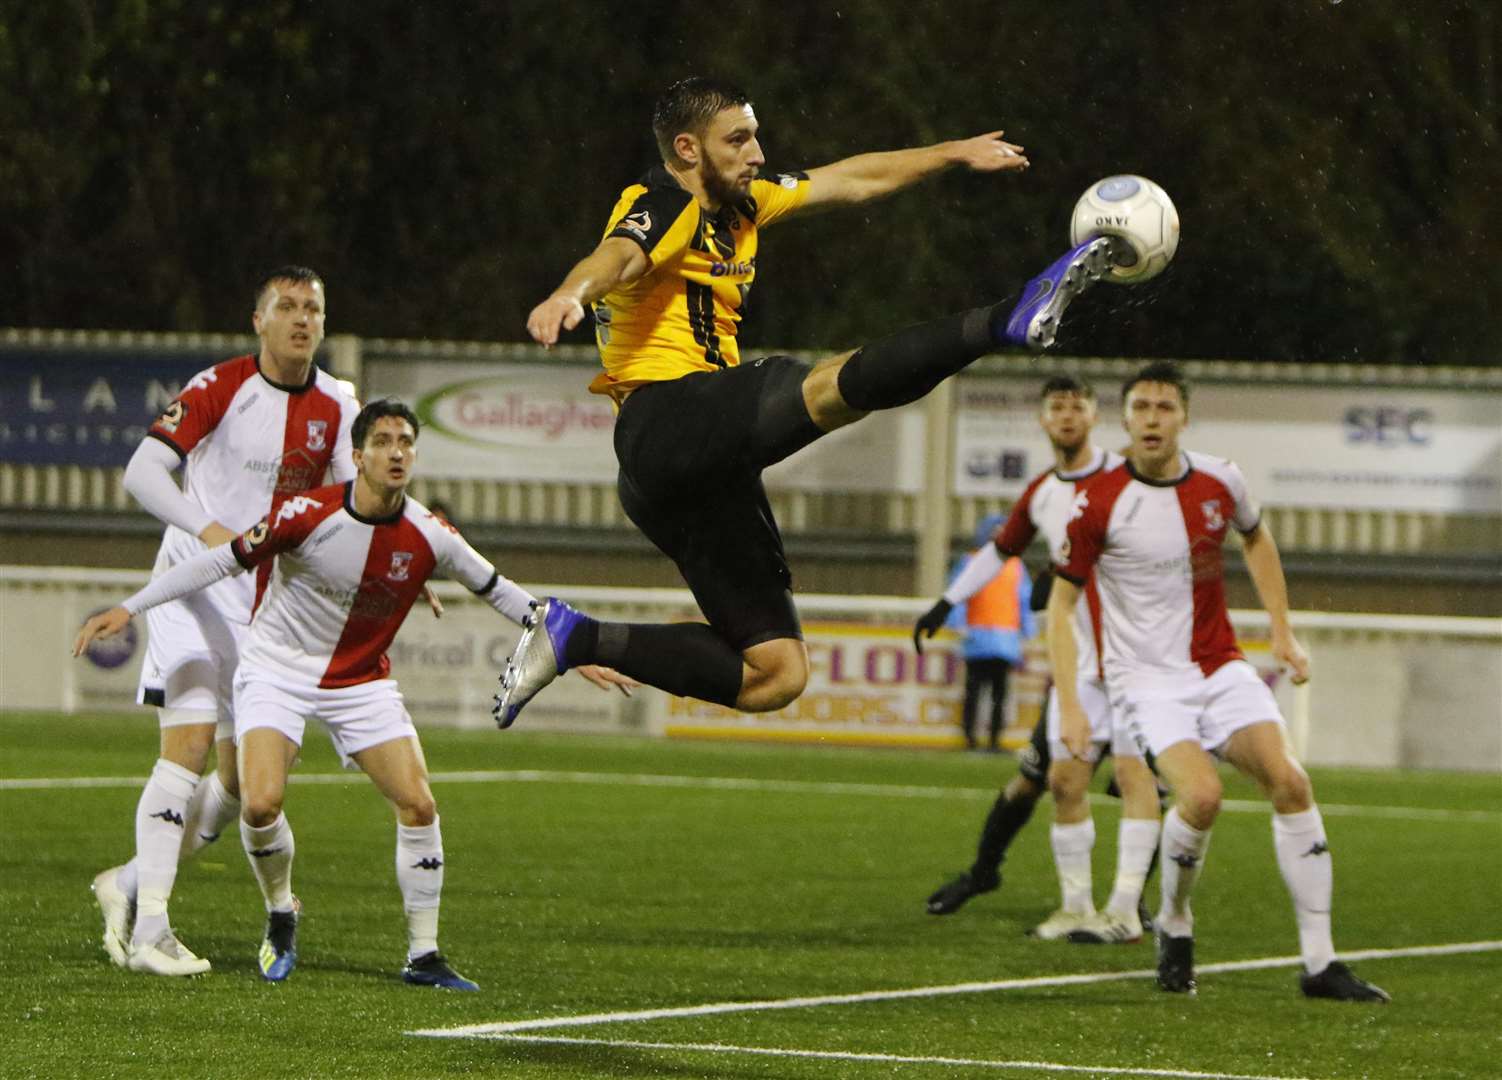 Jake Cassidy scored his first Maidstone goal in the FA Trophy win over Woking Picture: Andy Jones